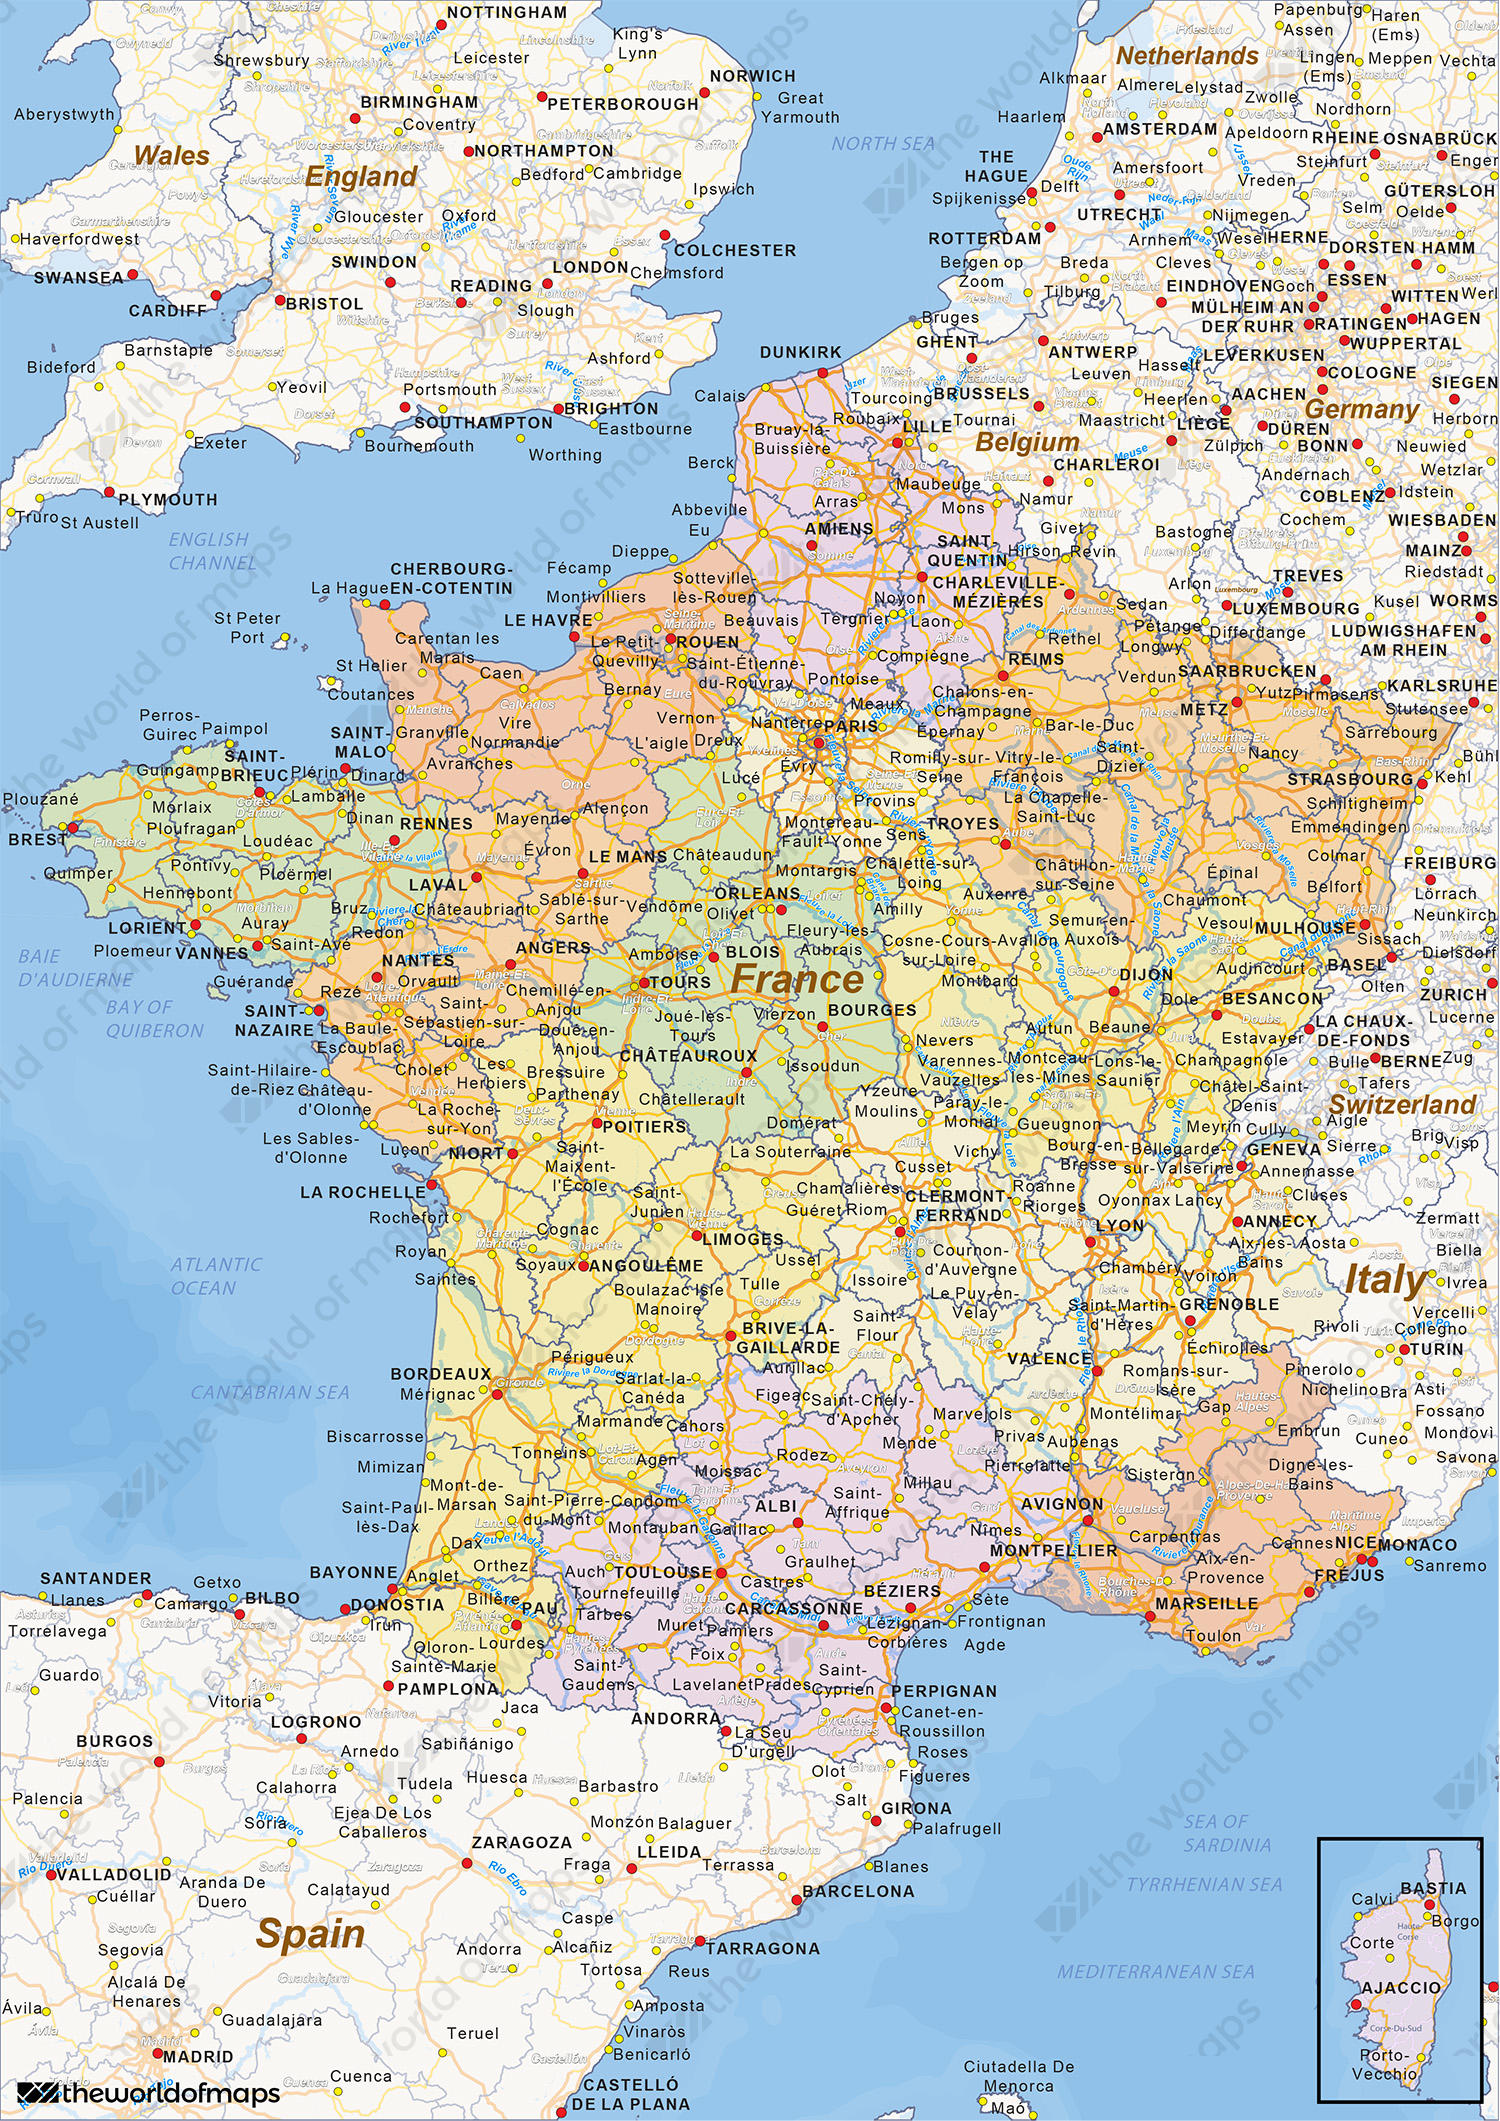 Digital political map of France 1434 | The World of Maps.com